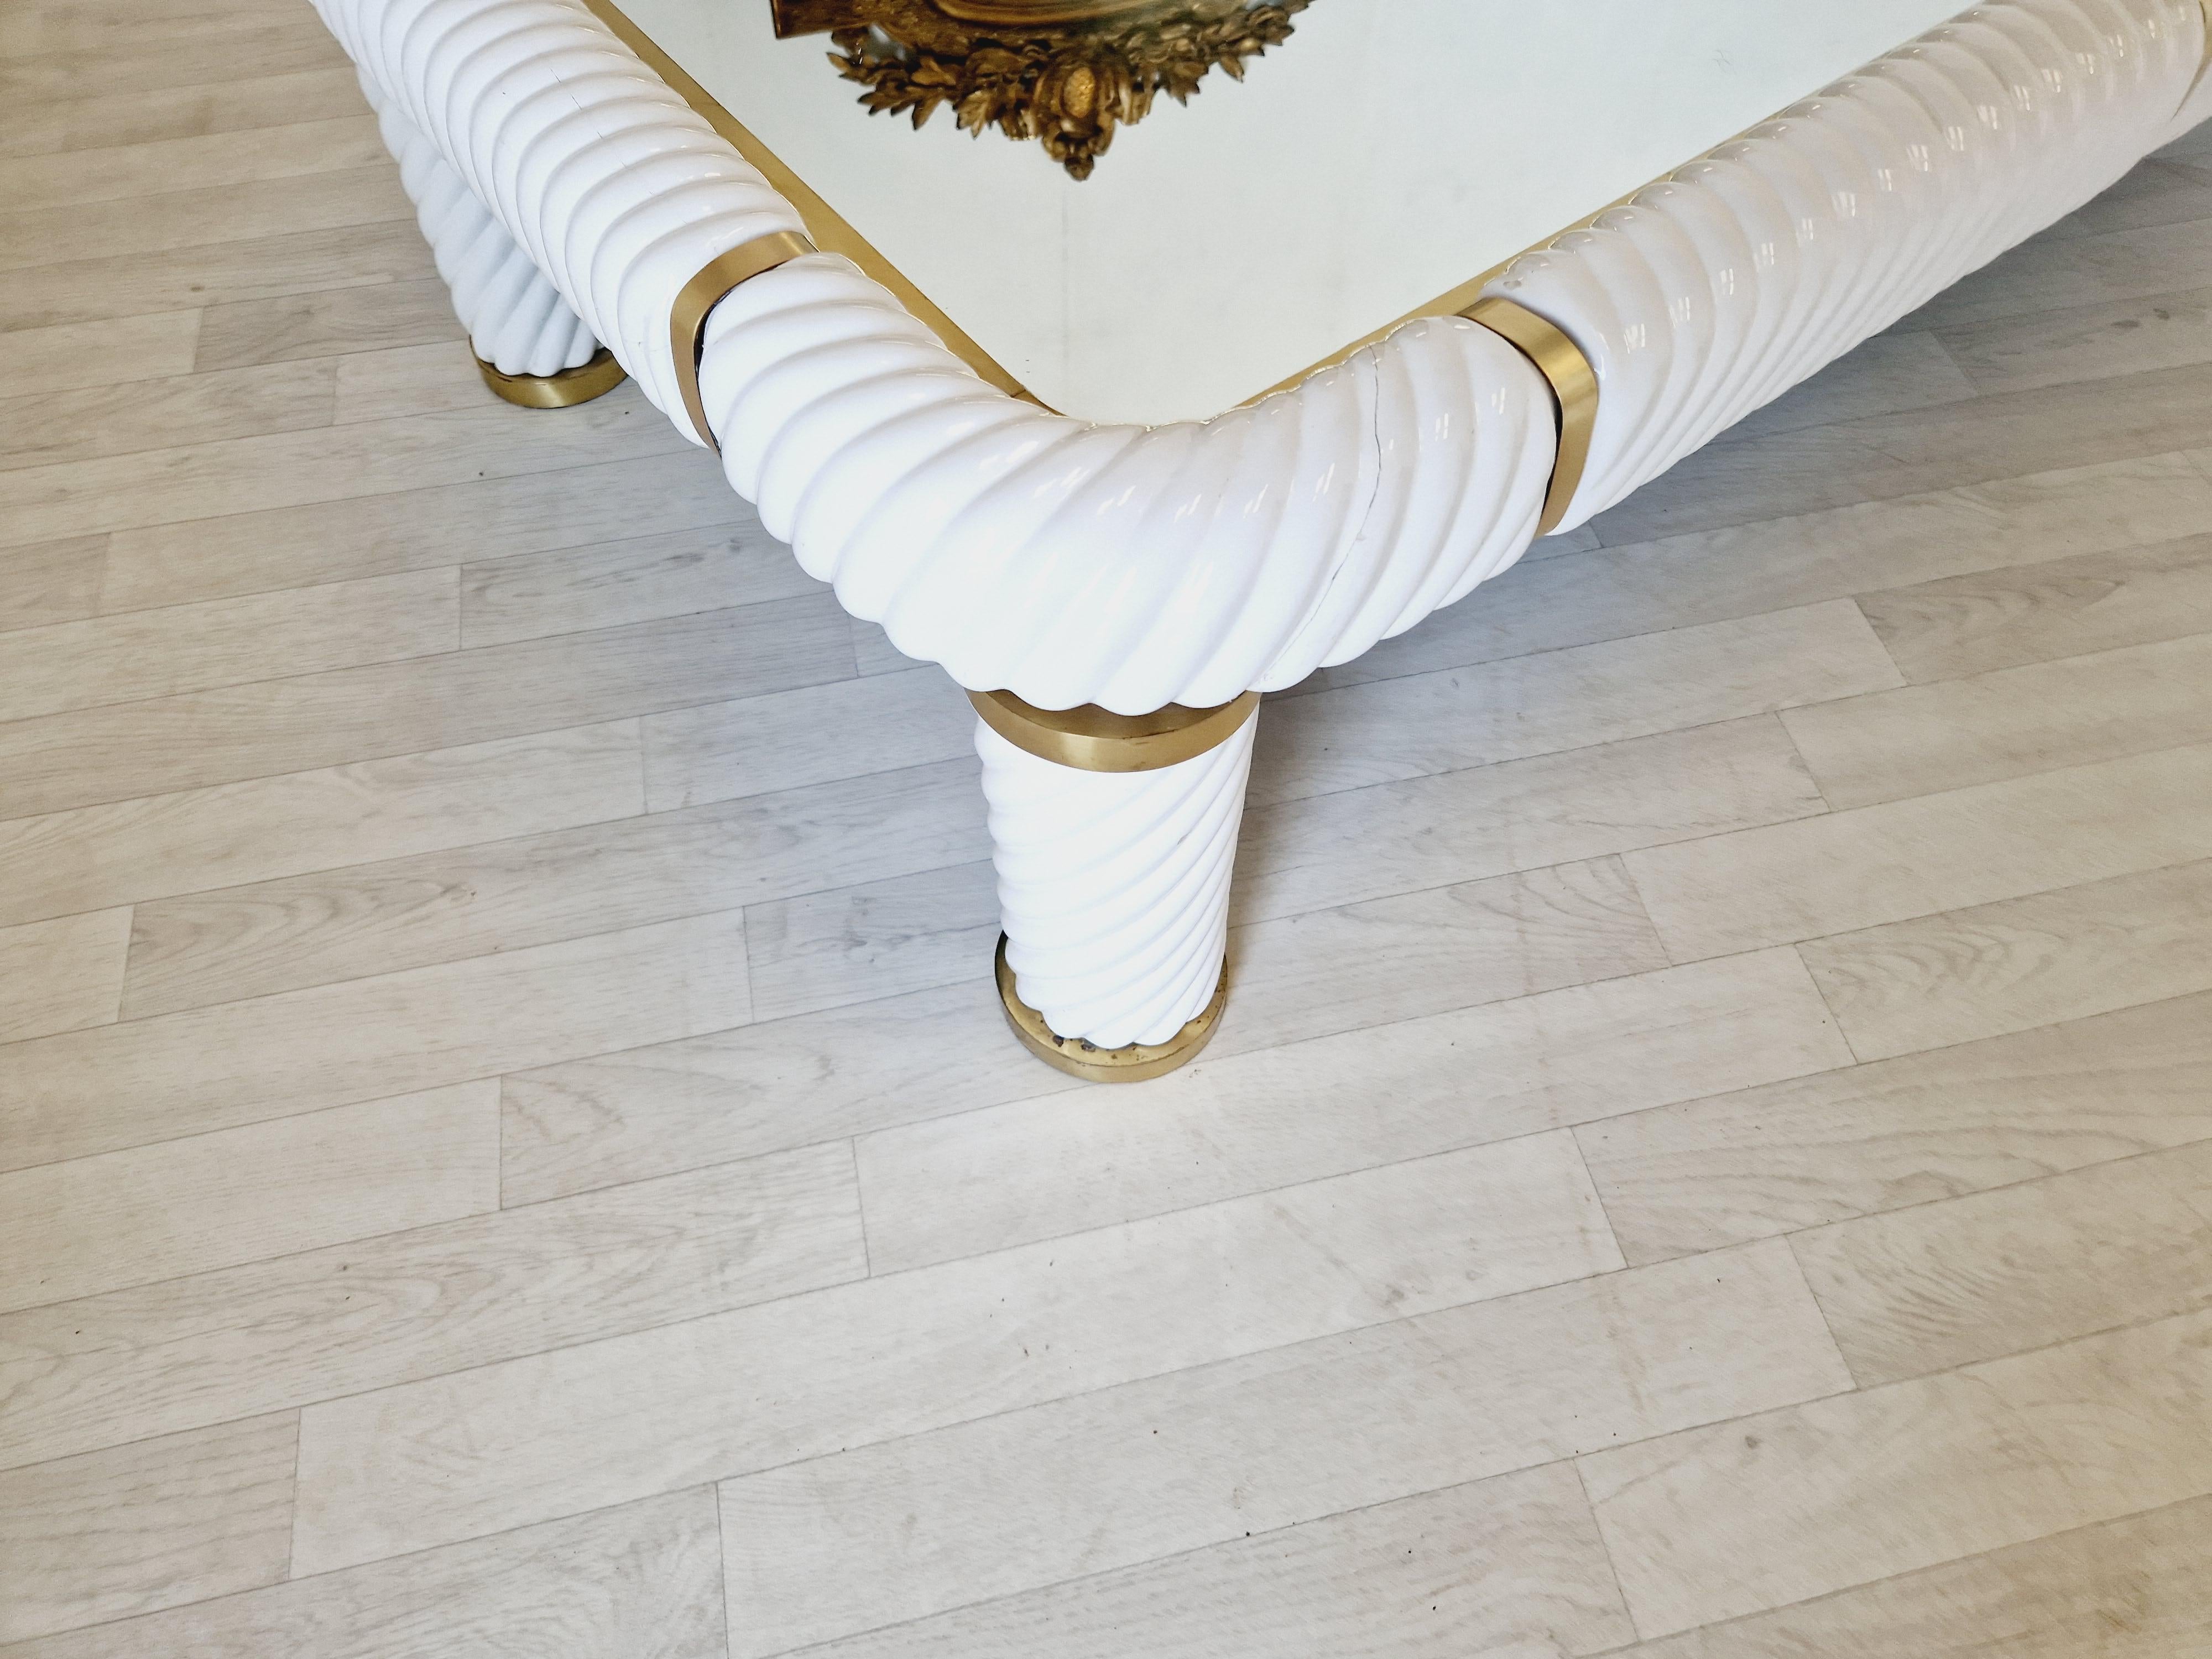 This vintage large Tommaso Barbi coffee table in white ceramic and brass is a stunning addition to any room. The rectangular shape and fully assembled design make it a convenient and practical choice. The table features one of Barbi's signature